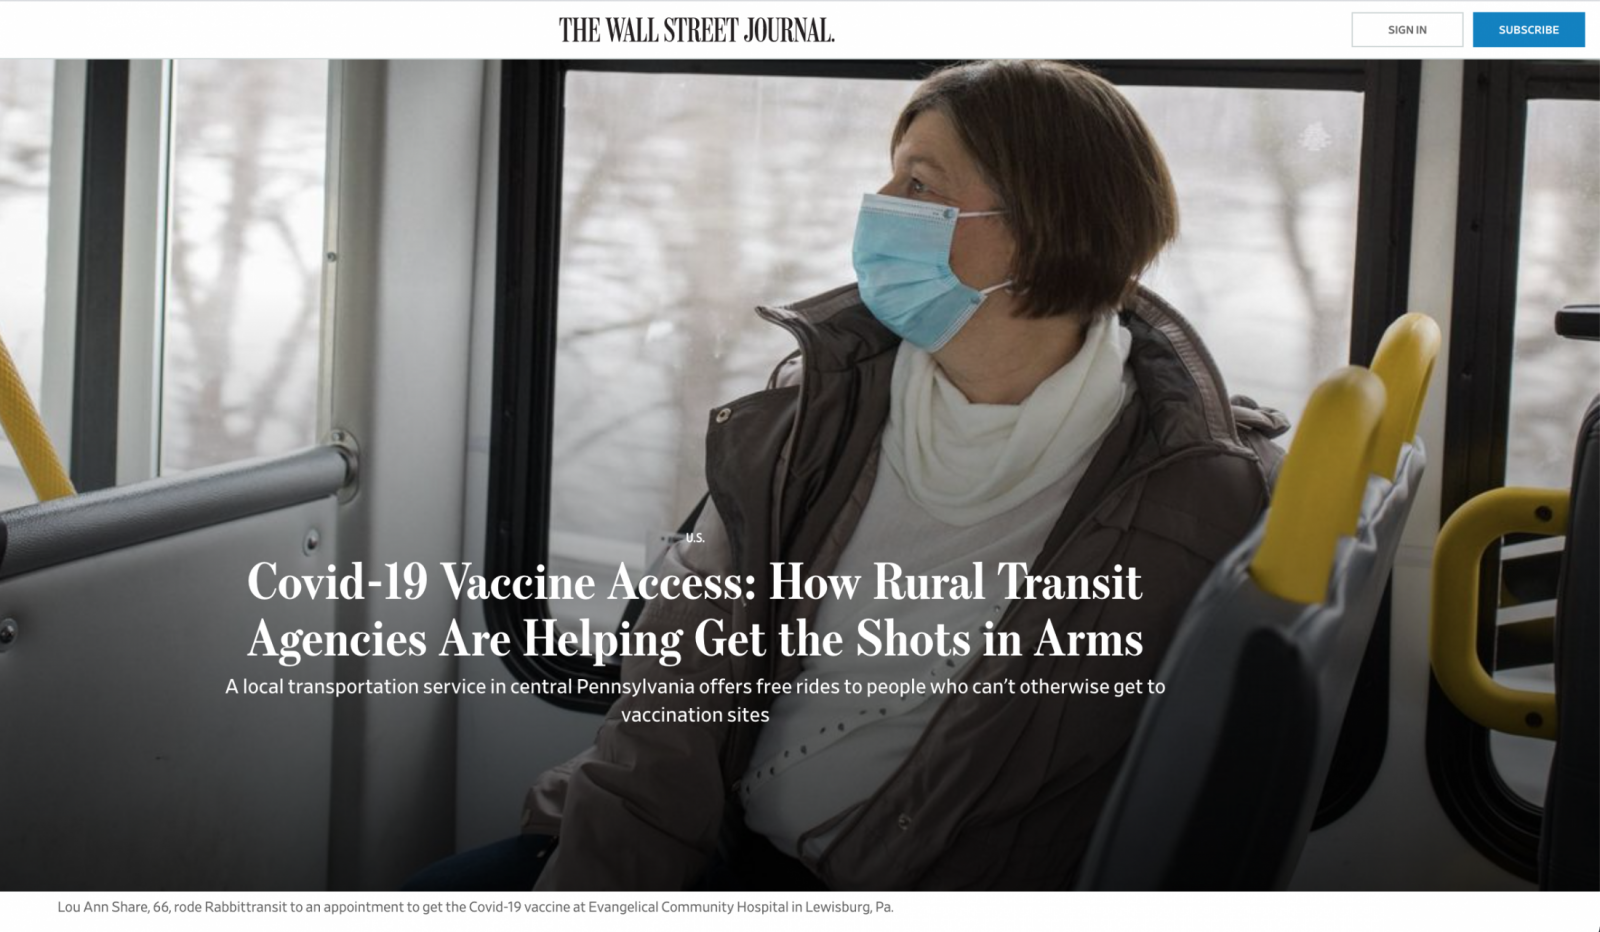 Thumbnail of on the Wall Street Journal: Covid-19 Vaccine Access: How Rural Transit Agencies Are Helping Get the Shots in Arms